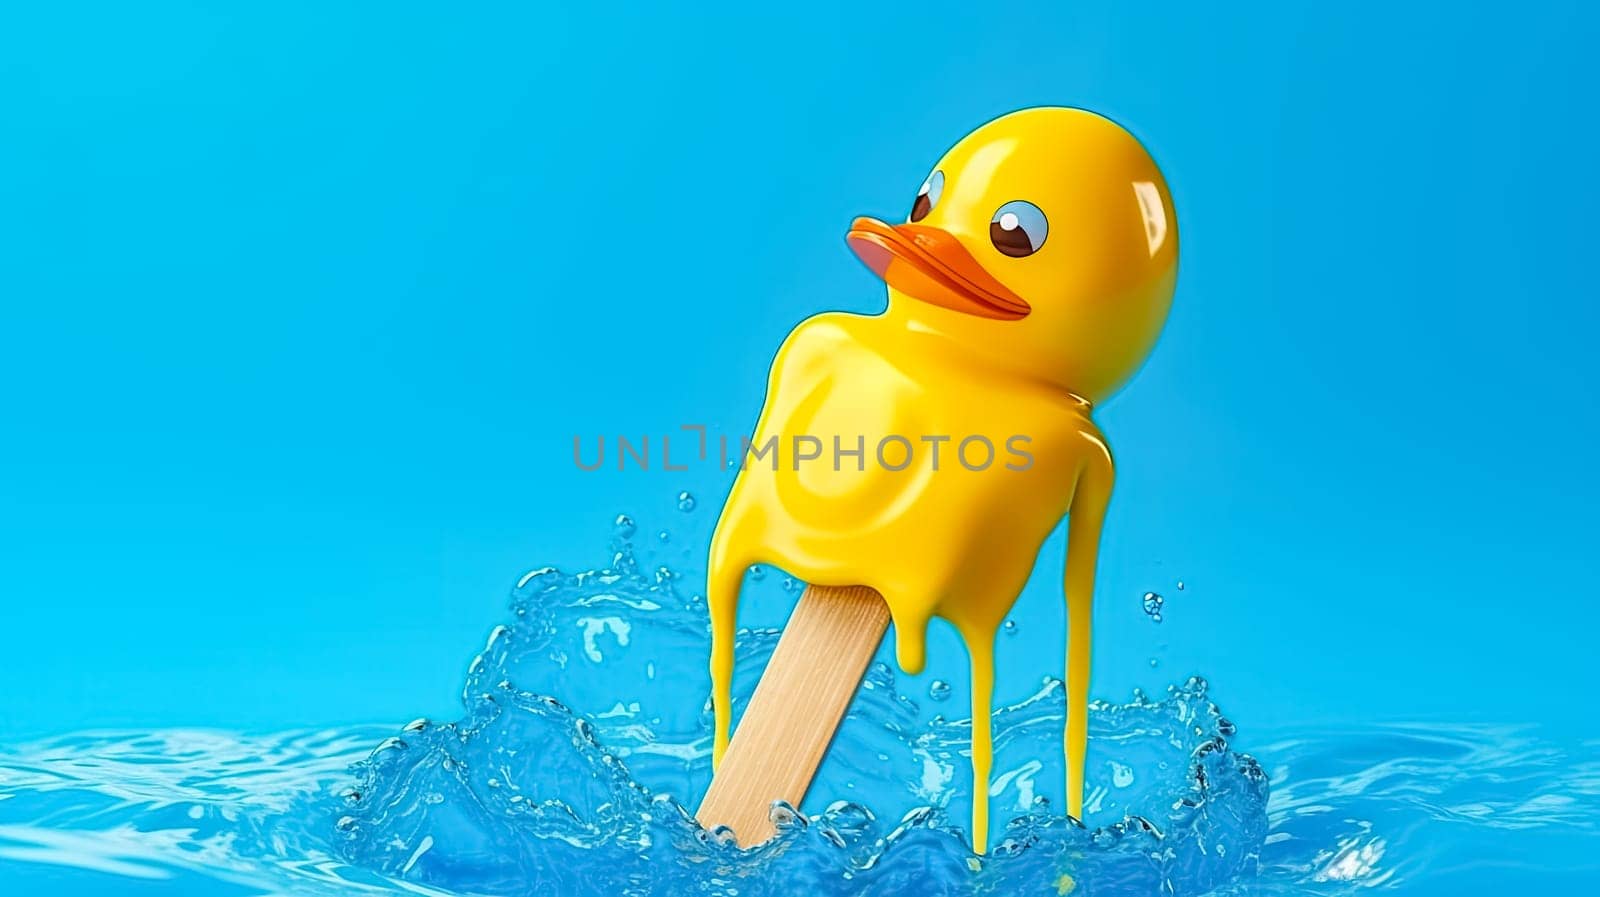 Chill vibes A delectable scoop of ice cream adorned with a cute yellow duck, set against a refreshing blue backdrop. Summers sweet escape.